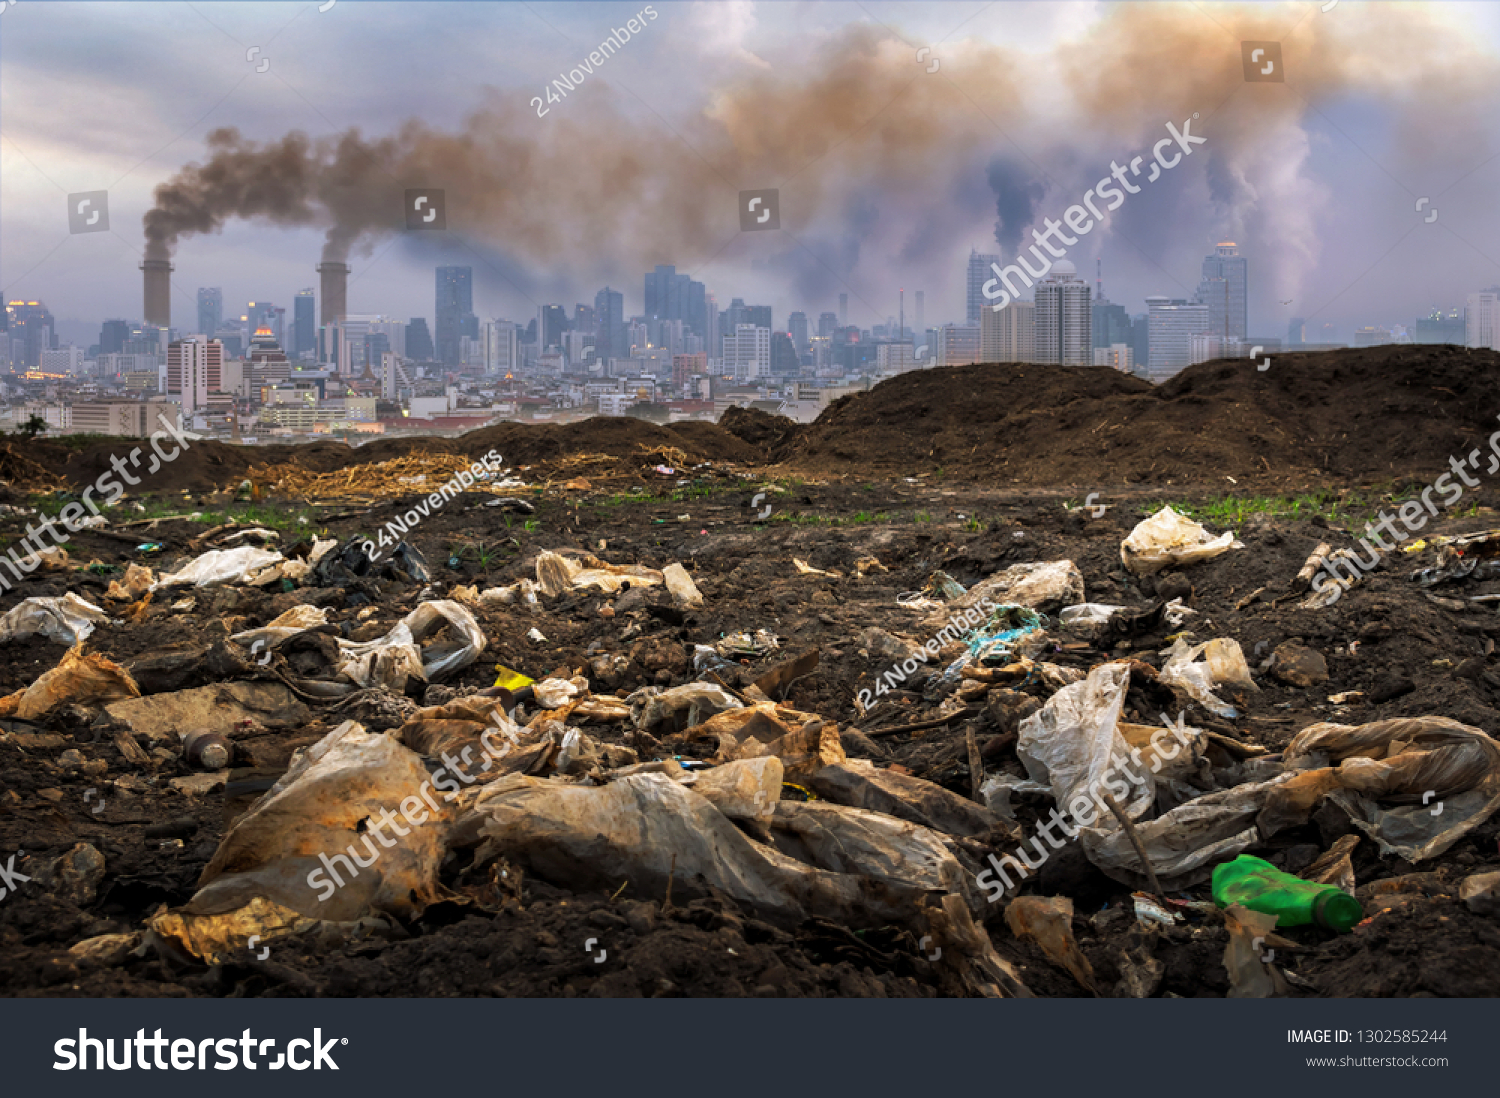 Toxic waste from human hands Industries that create pollution and cities that are affected by pollution. #1302585244